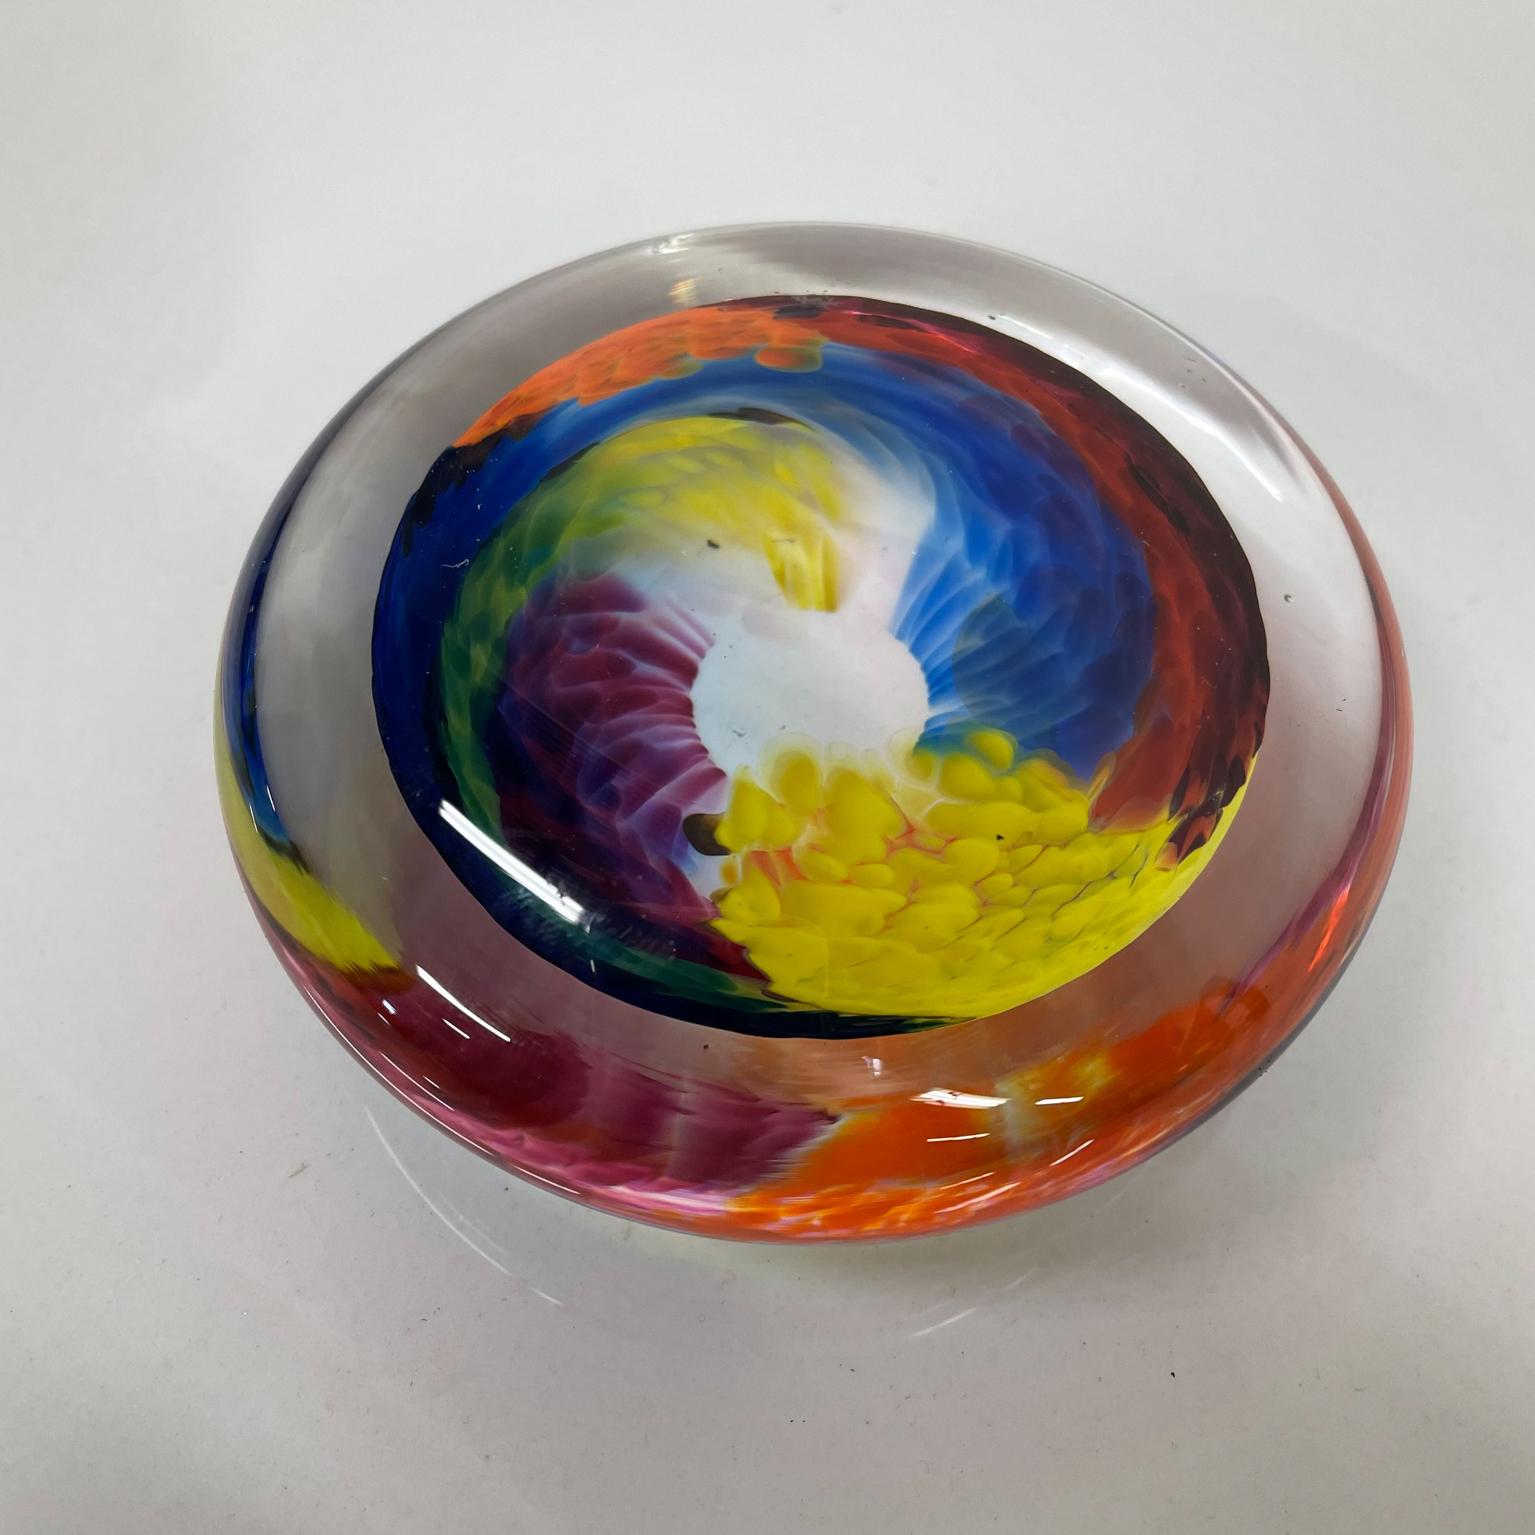 American Vintage Art Glass Psychedelic Sea of Color Modern Paperweight, 1970s